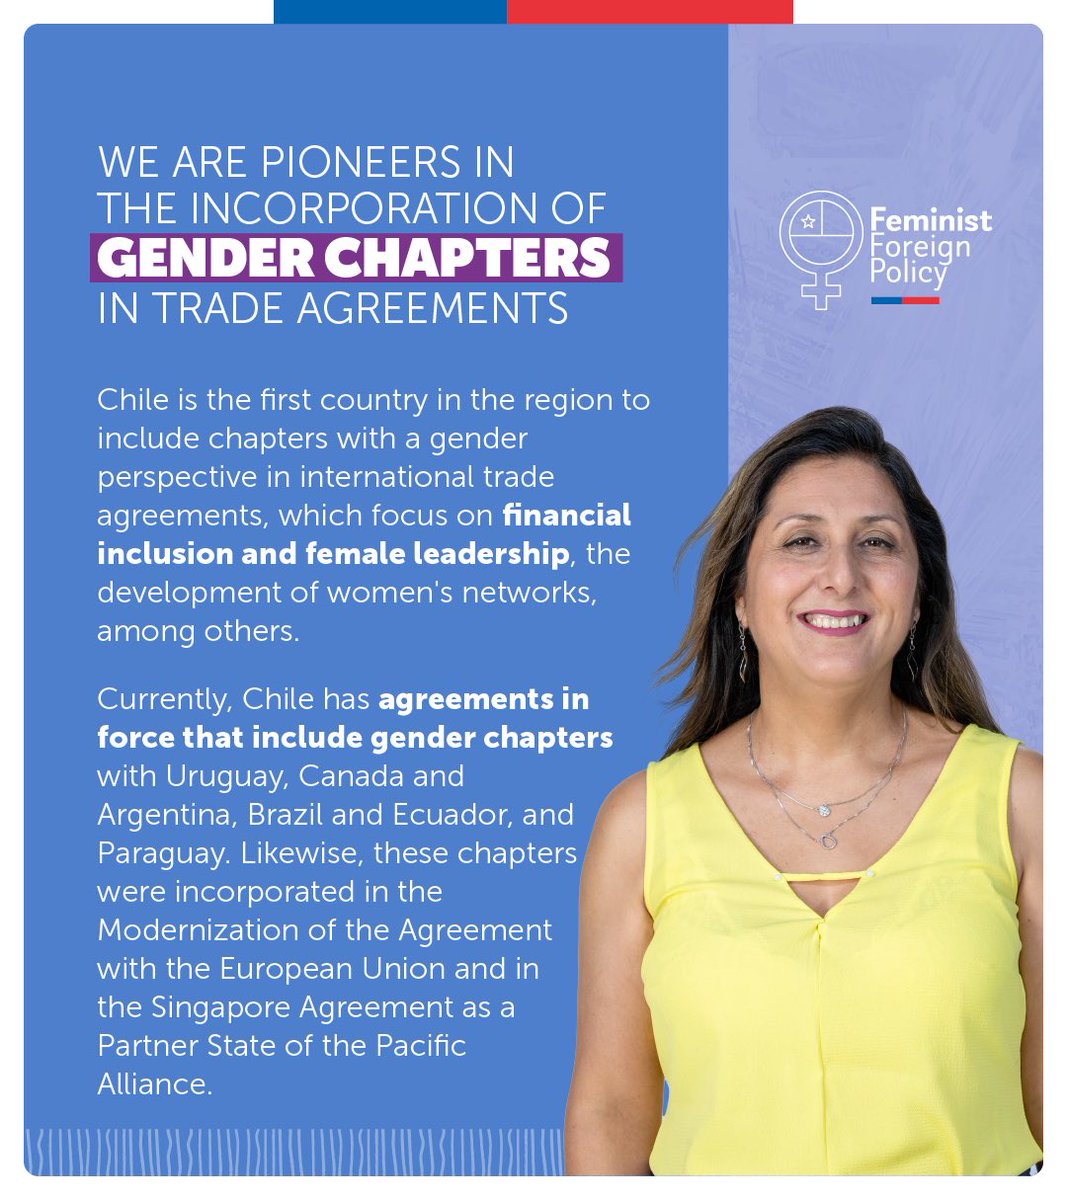 @dicoex @ChileMFA @EmbChileBelgica @UEenChile @MinMujeryEG @gdelafue @clausanhueza @SernamEGChile @eu_eeas Chile has been a pioneer in including gender chapters in its trade agreements, in order to promote the full participation of women in different economic activities and, thus, strengthen the development of the country. #8M #InternationalWomensDay #ChileParaTodas